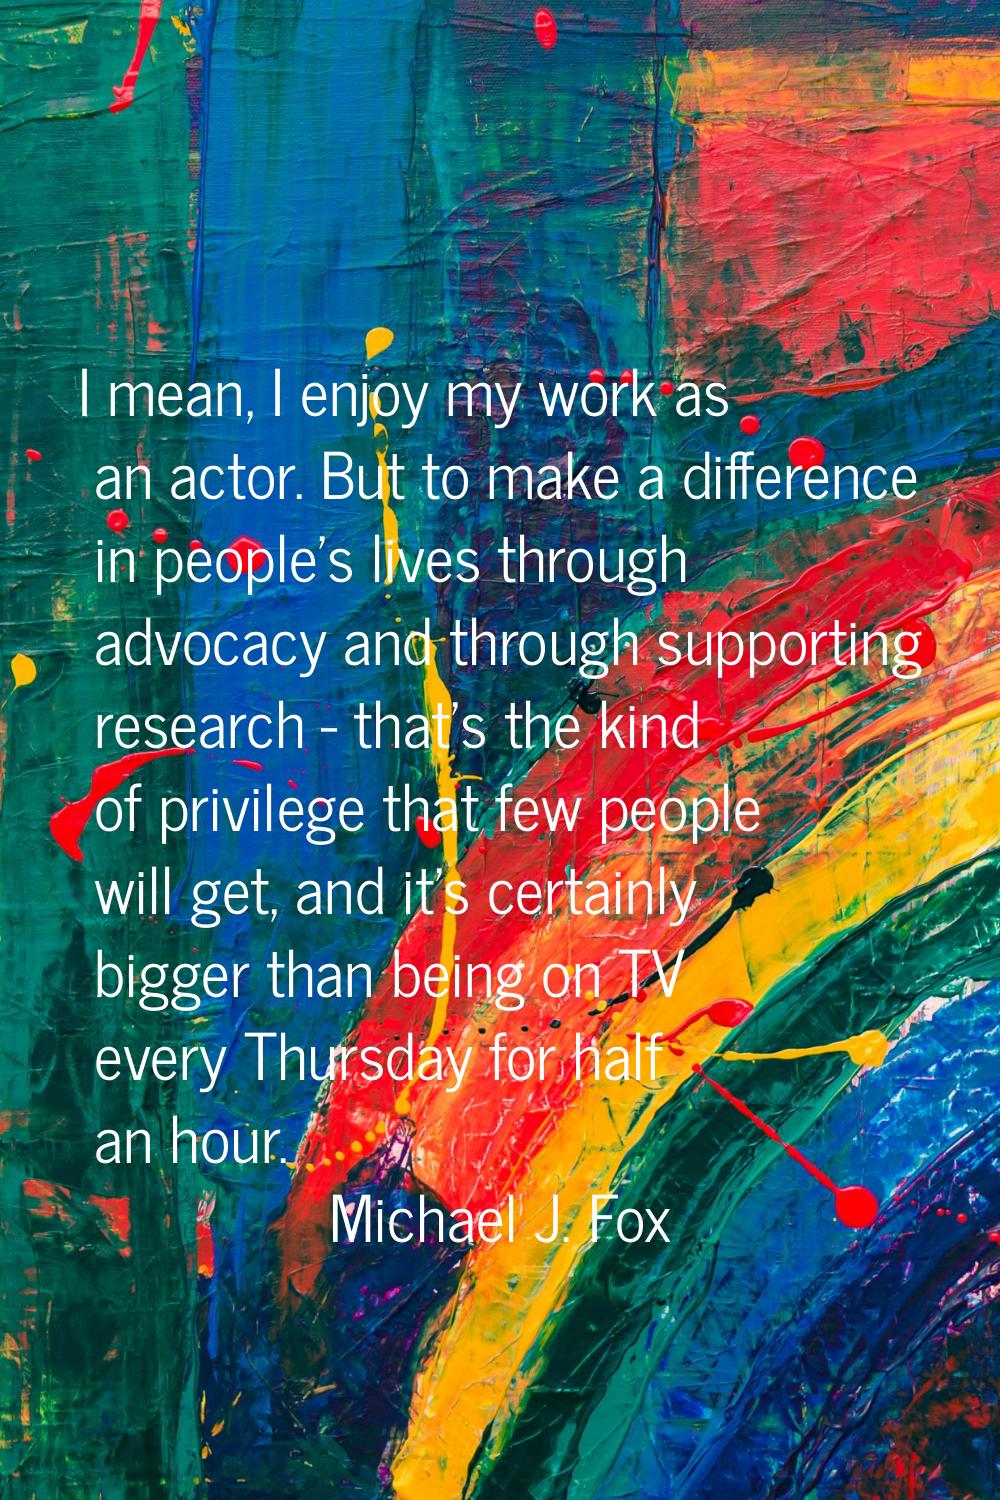 I mean, I enjoy my work as an actor. But to make a difference in people's lives through advocacy an